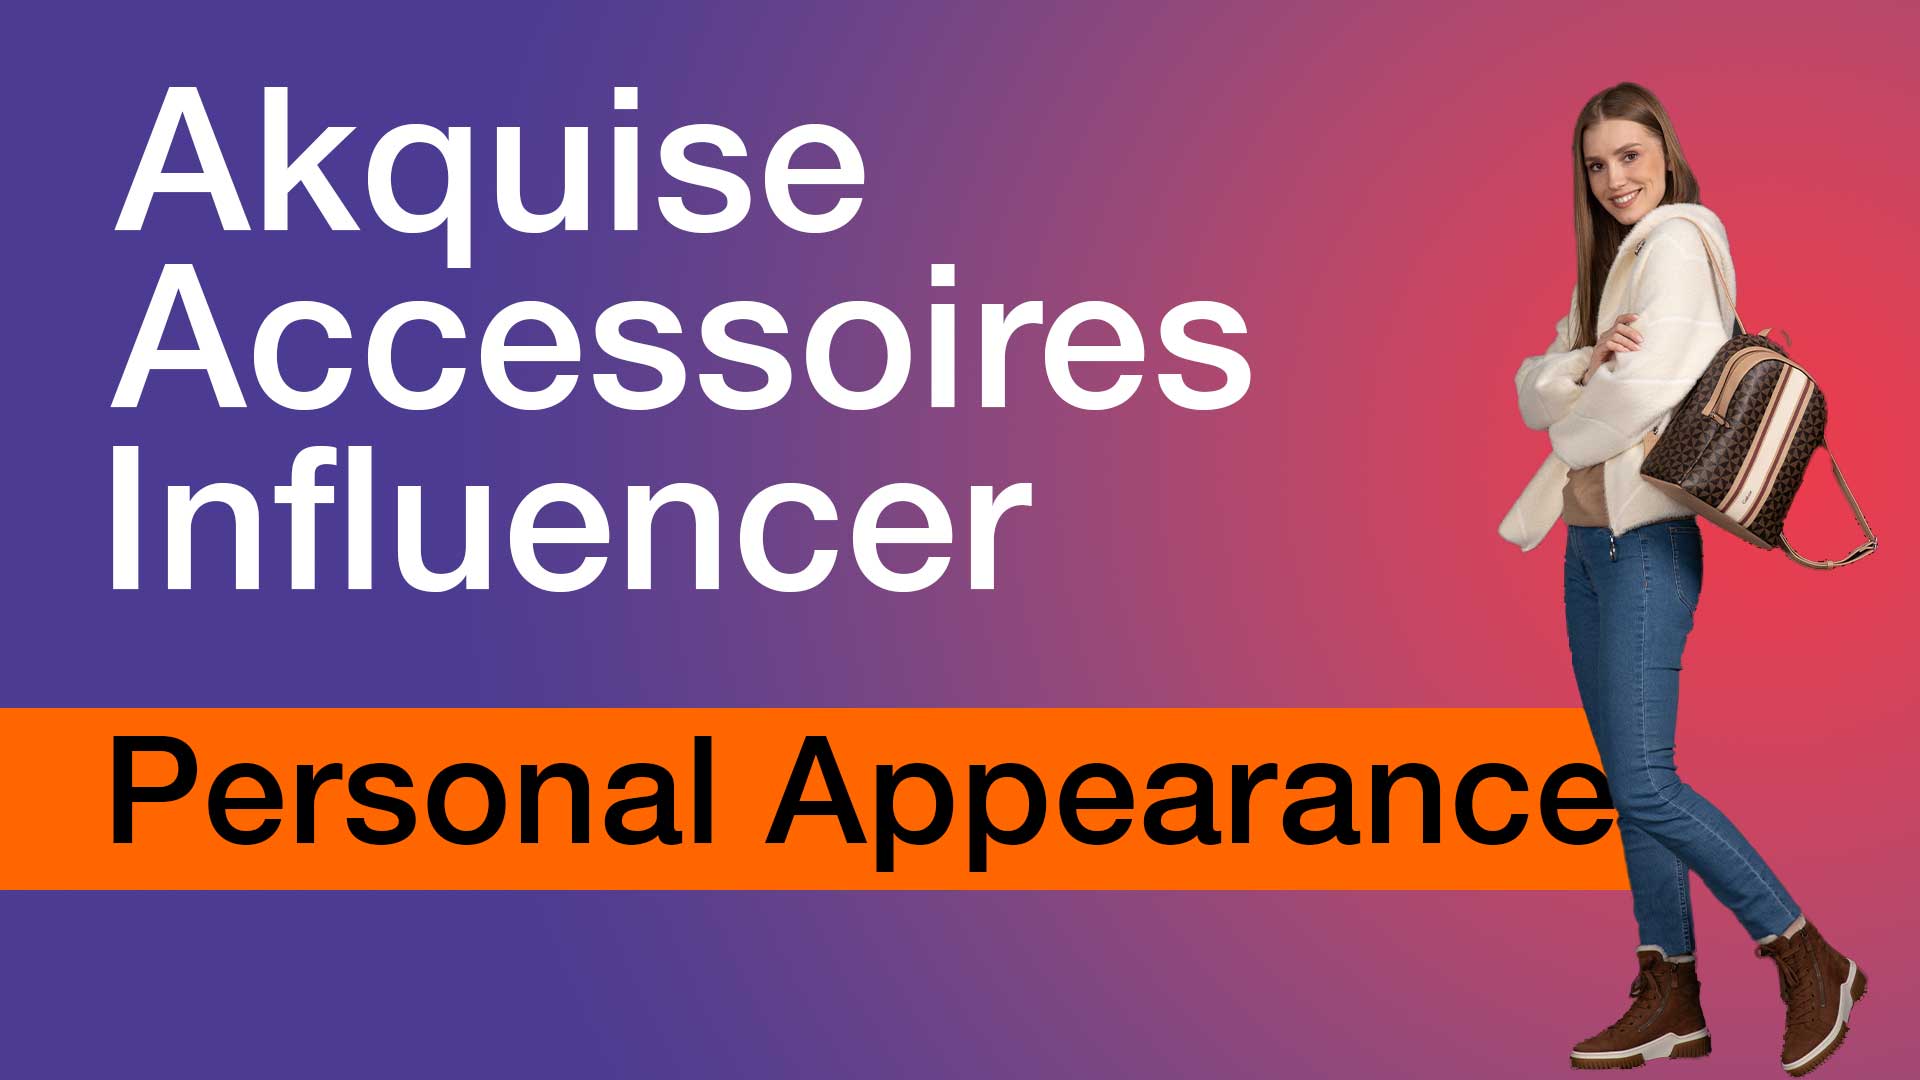 ACCESSOIRES Influencer Marketing inkl. Personal Appearance